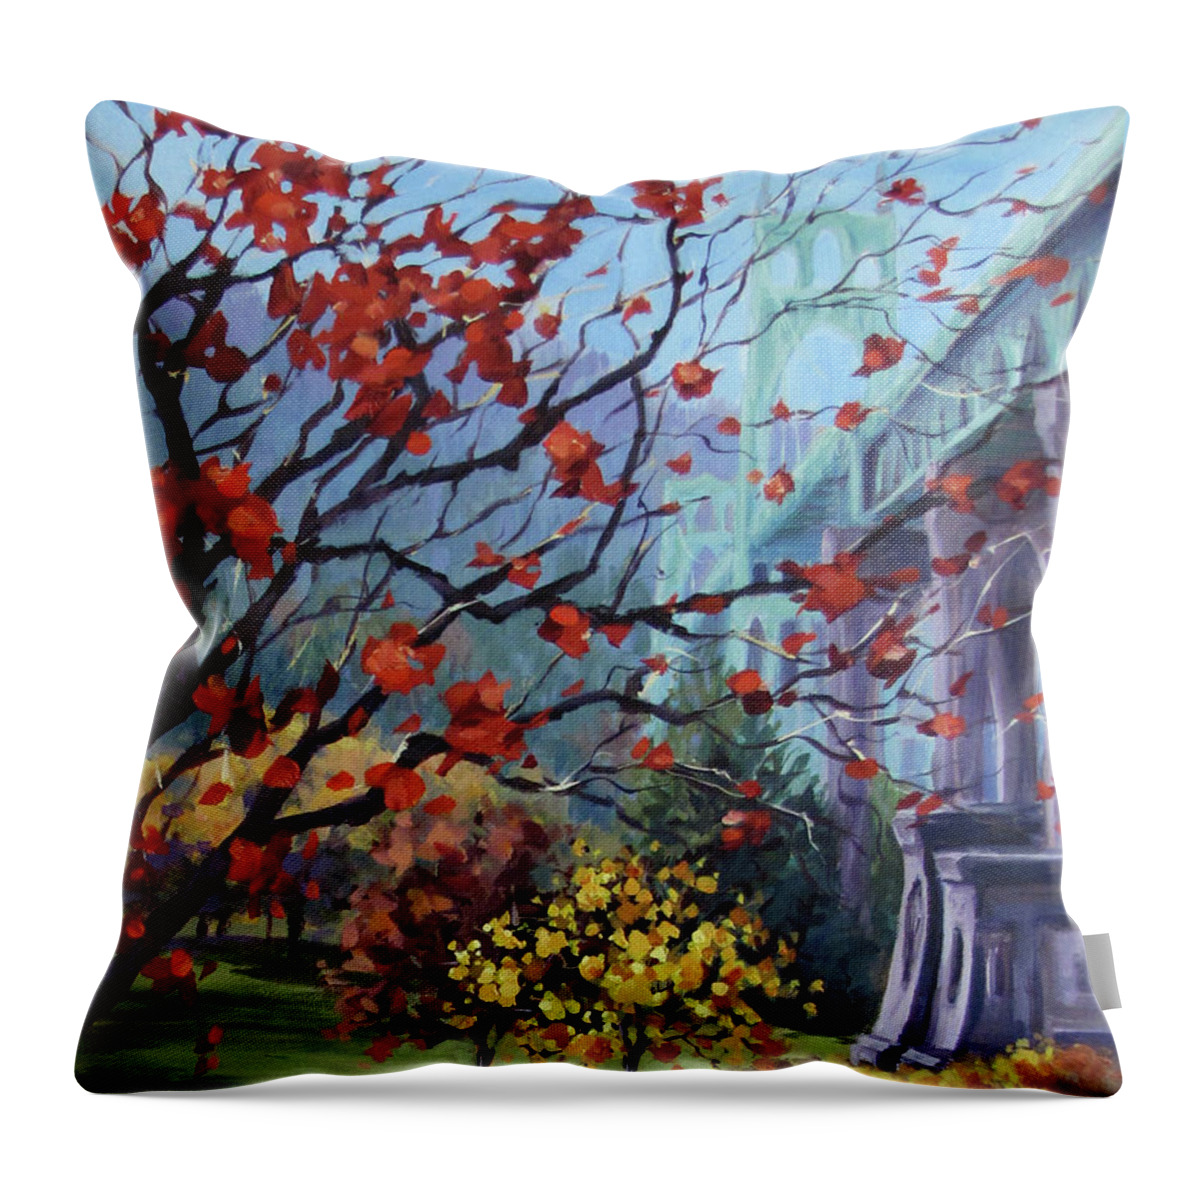 Fall Throw Pillow featuring the painting In The Rainbow by Karen Ilari